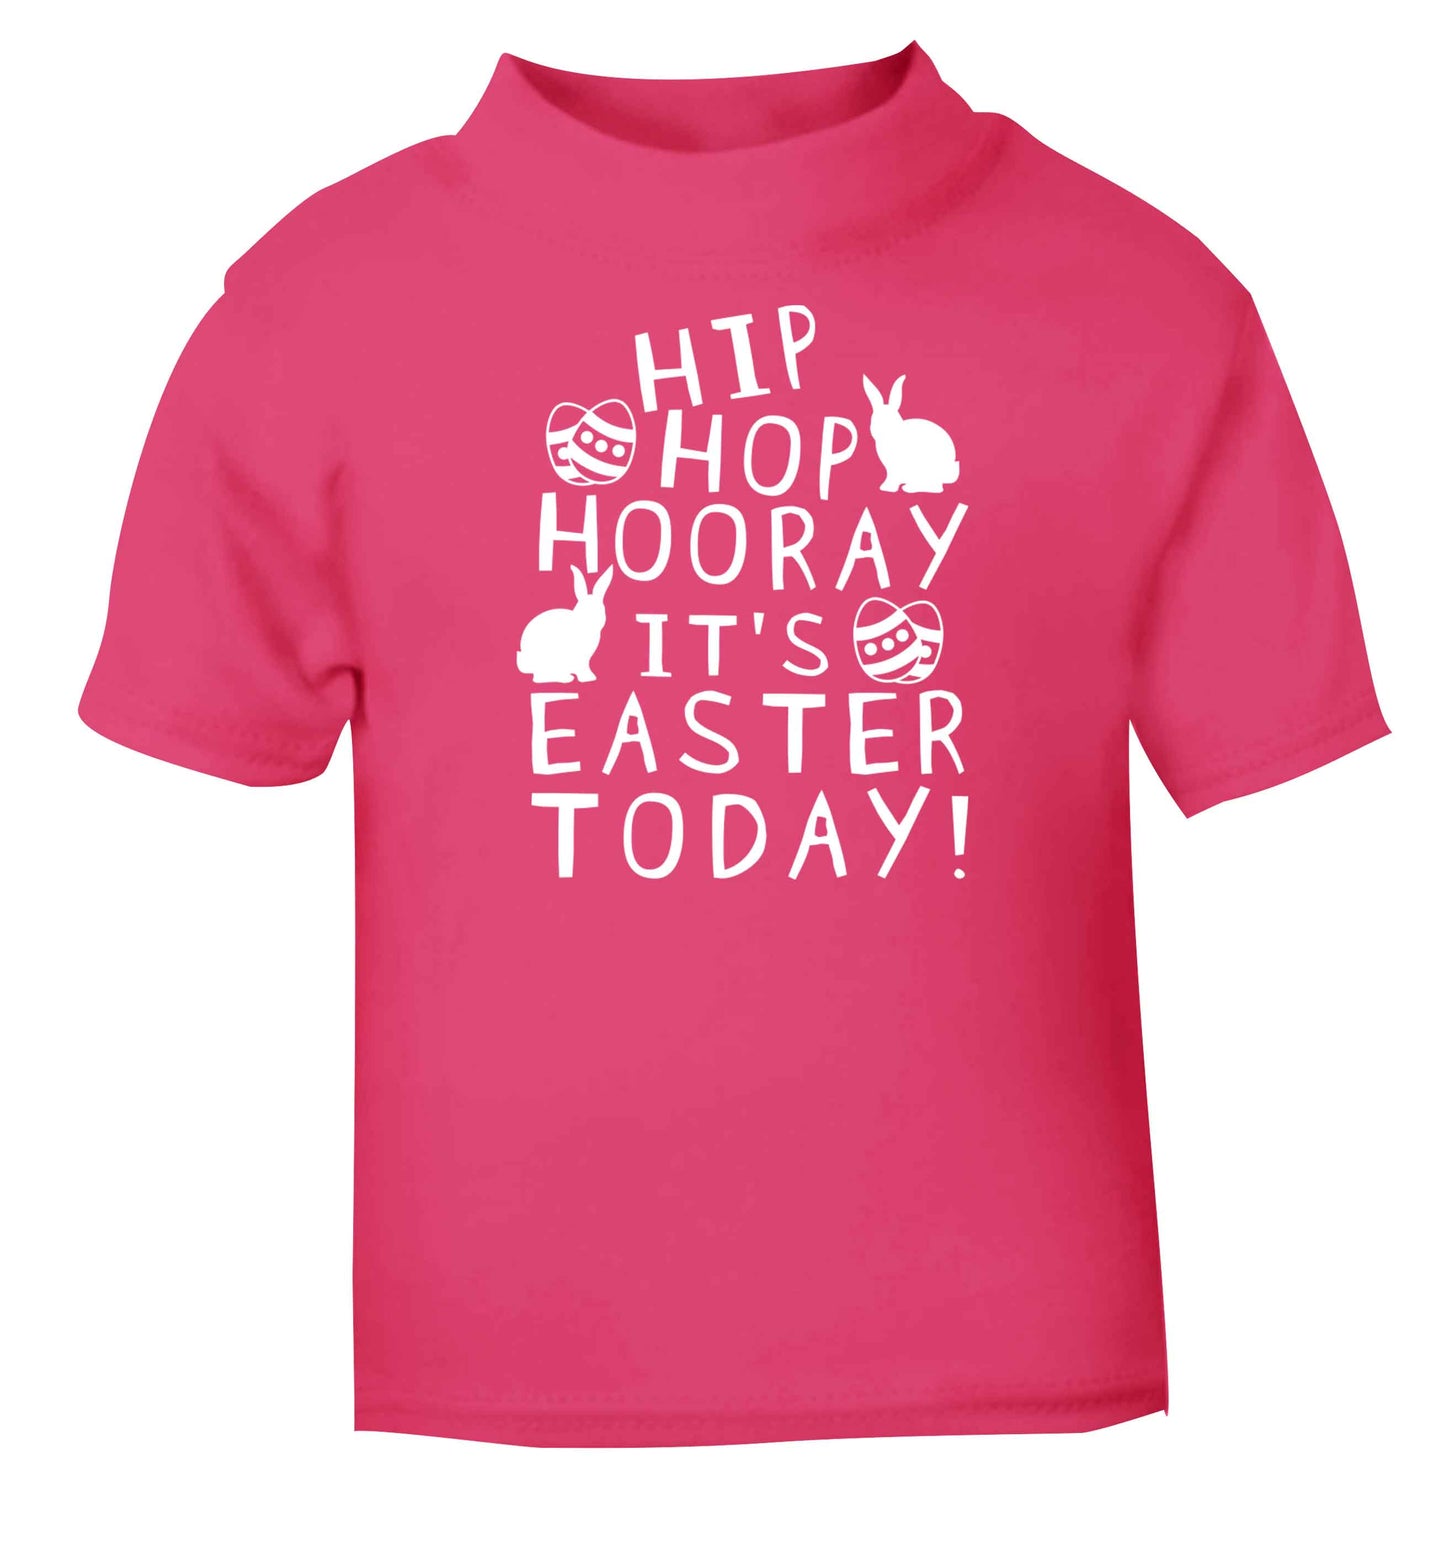 Hip hip hooray it's Easter today! pink baby toddler Tshirt 2 Years